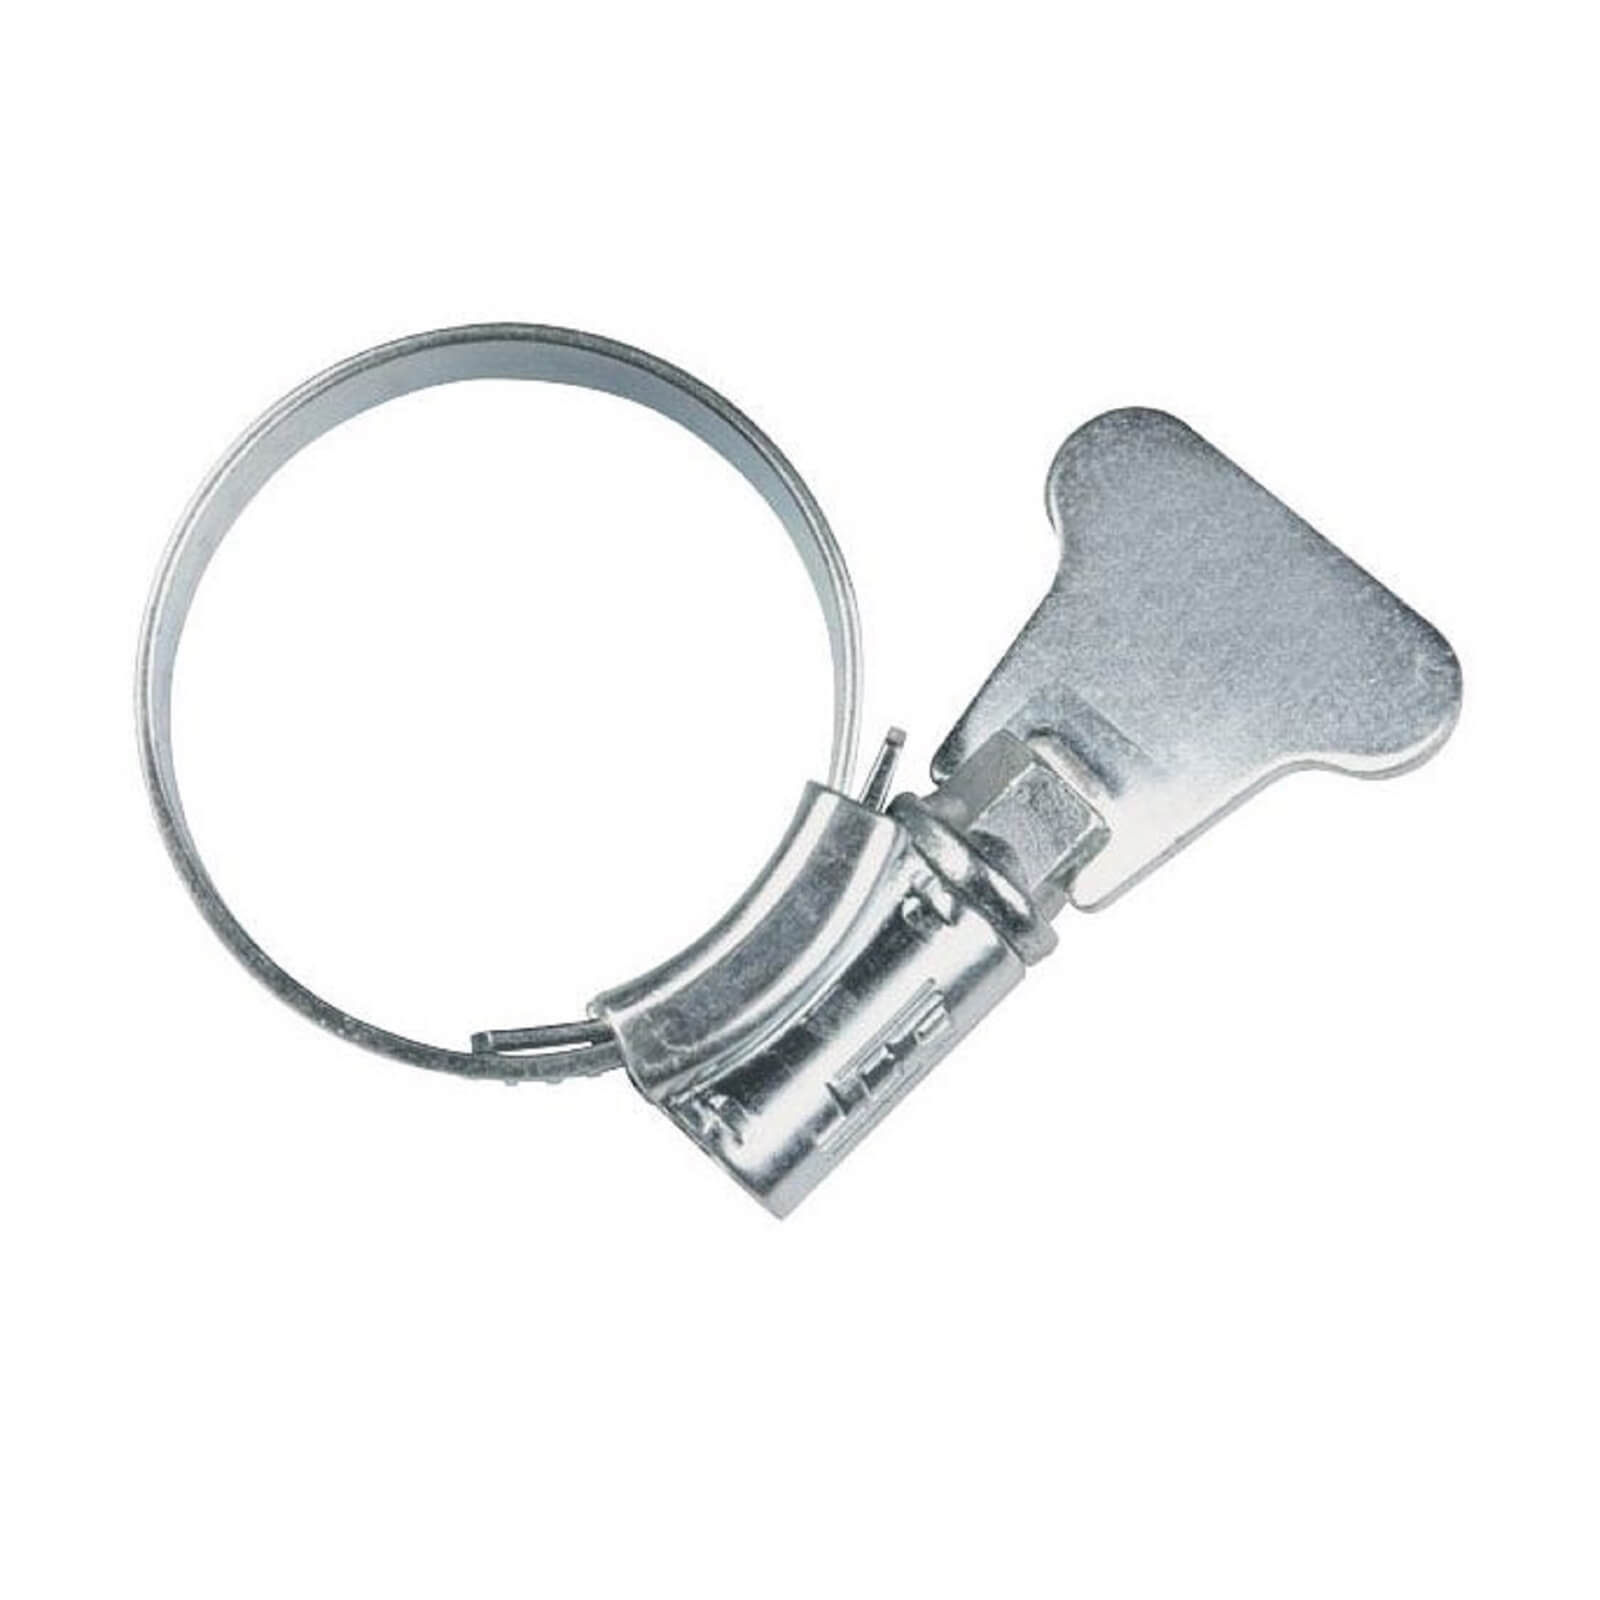 Photo of Oracstar Butterfly Hose Clip - 17-25mm